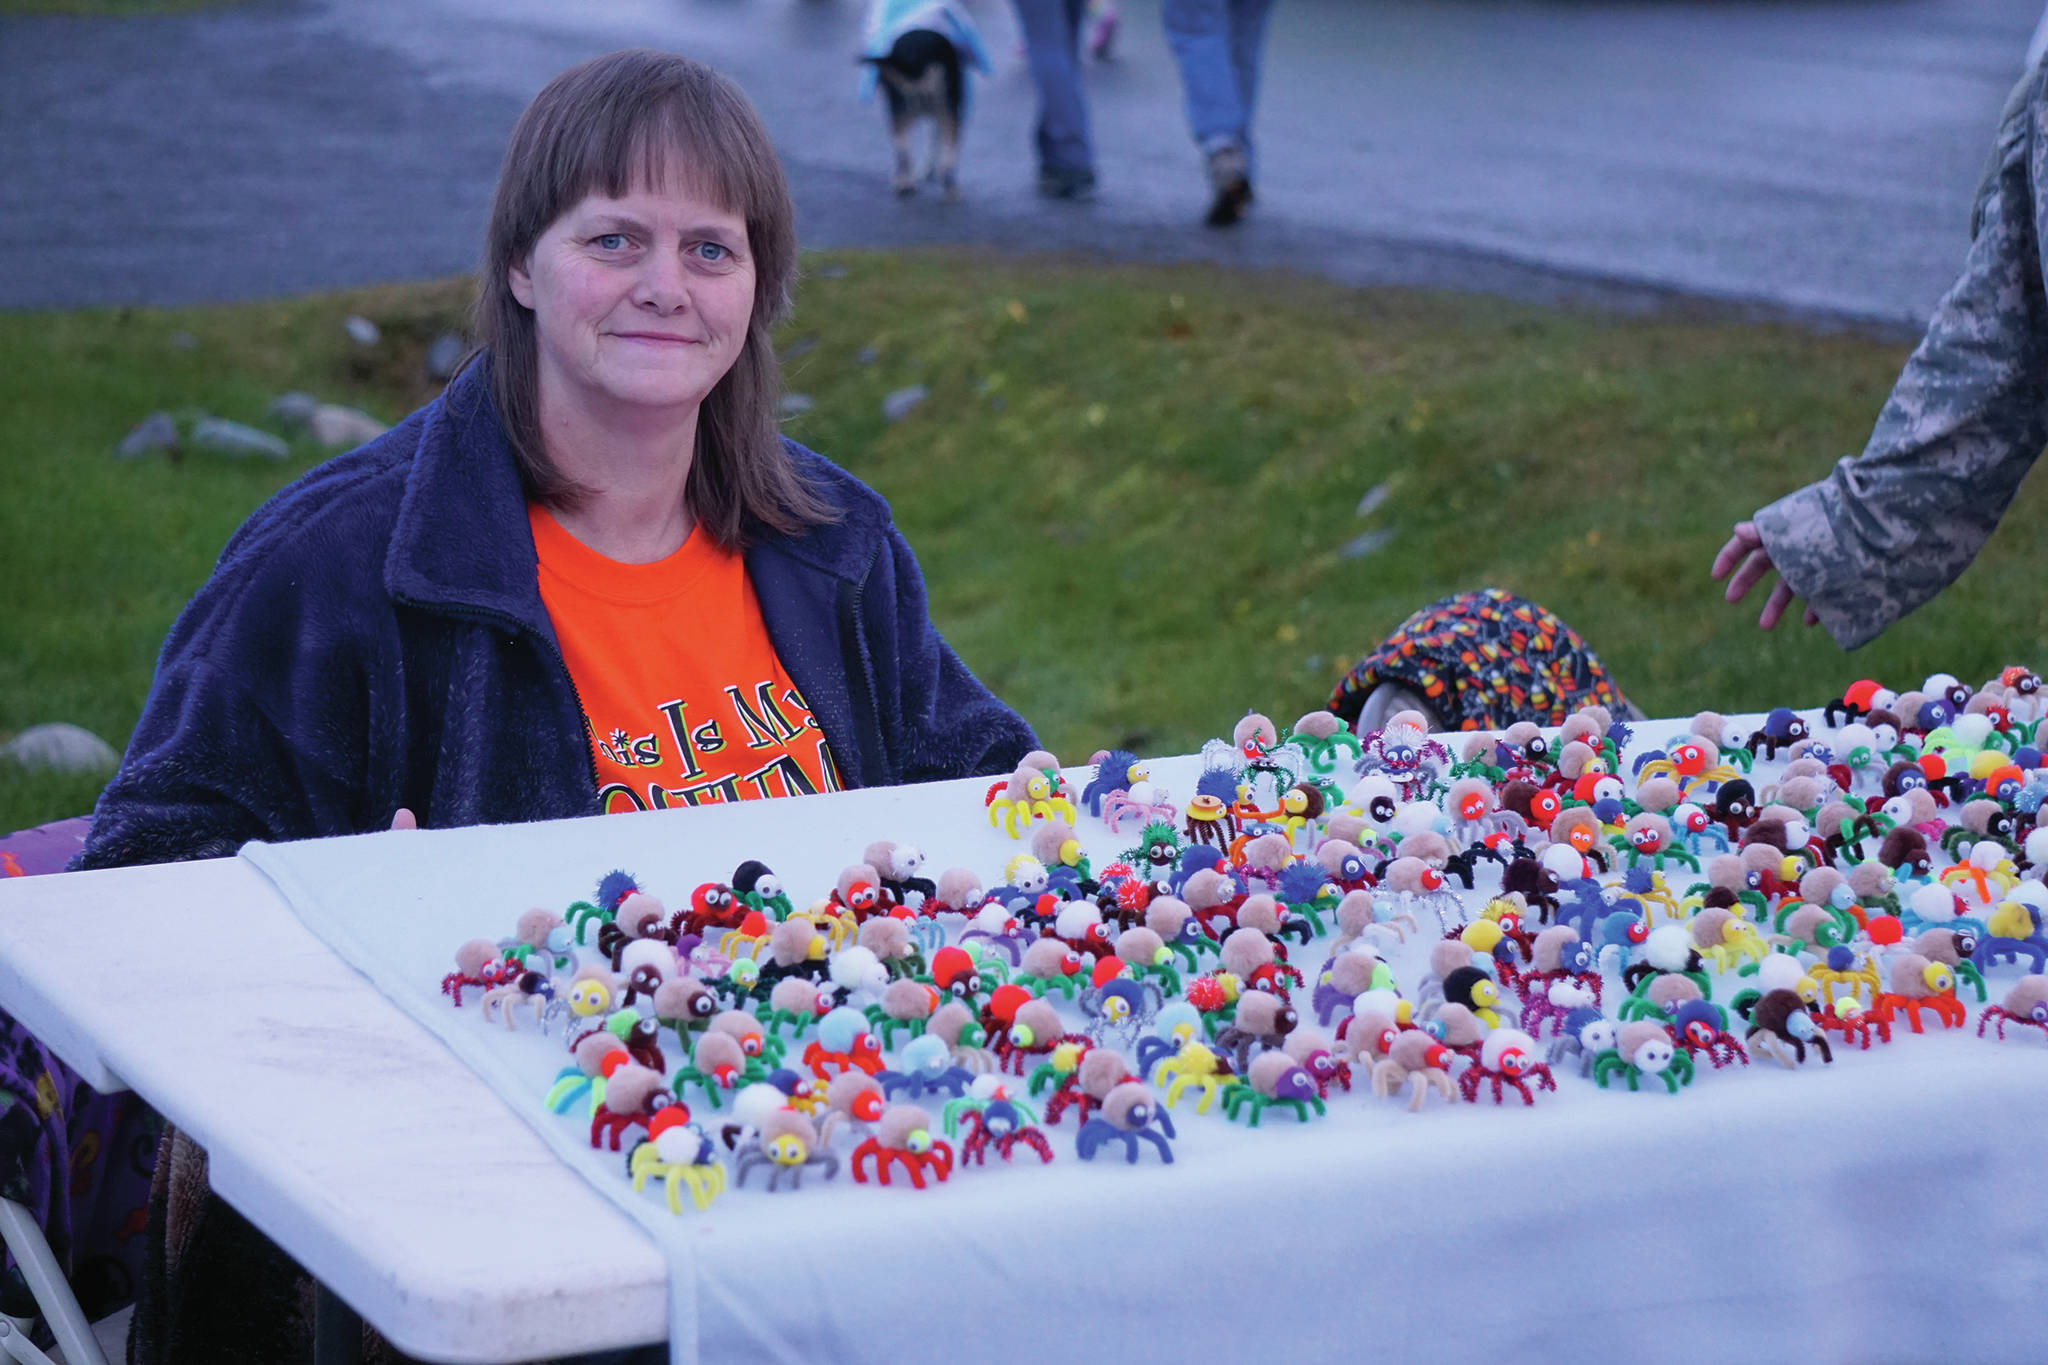 Molly Graham hands out pipecleaner spiders she made on Bayview Avenue on Oct. 31, 2019, in Homer, Alaska. (Photo by Michael Armstrong/Homer News)